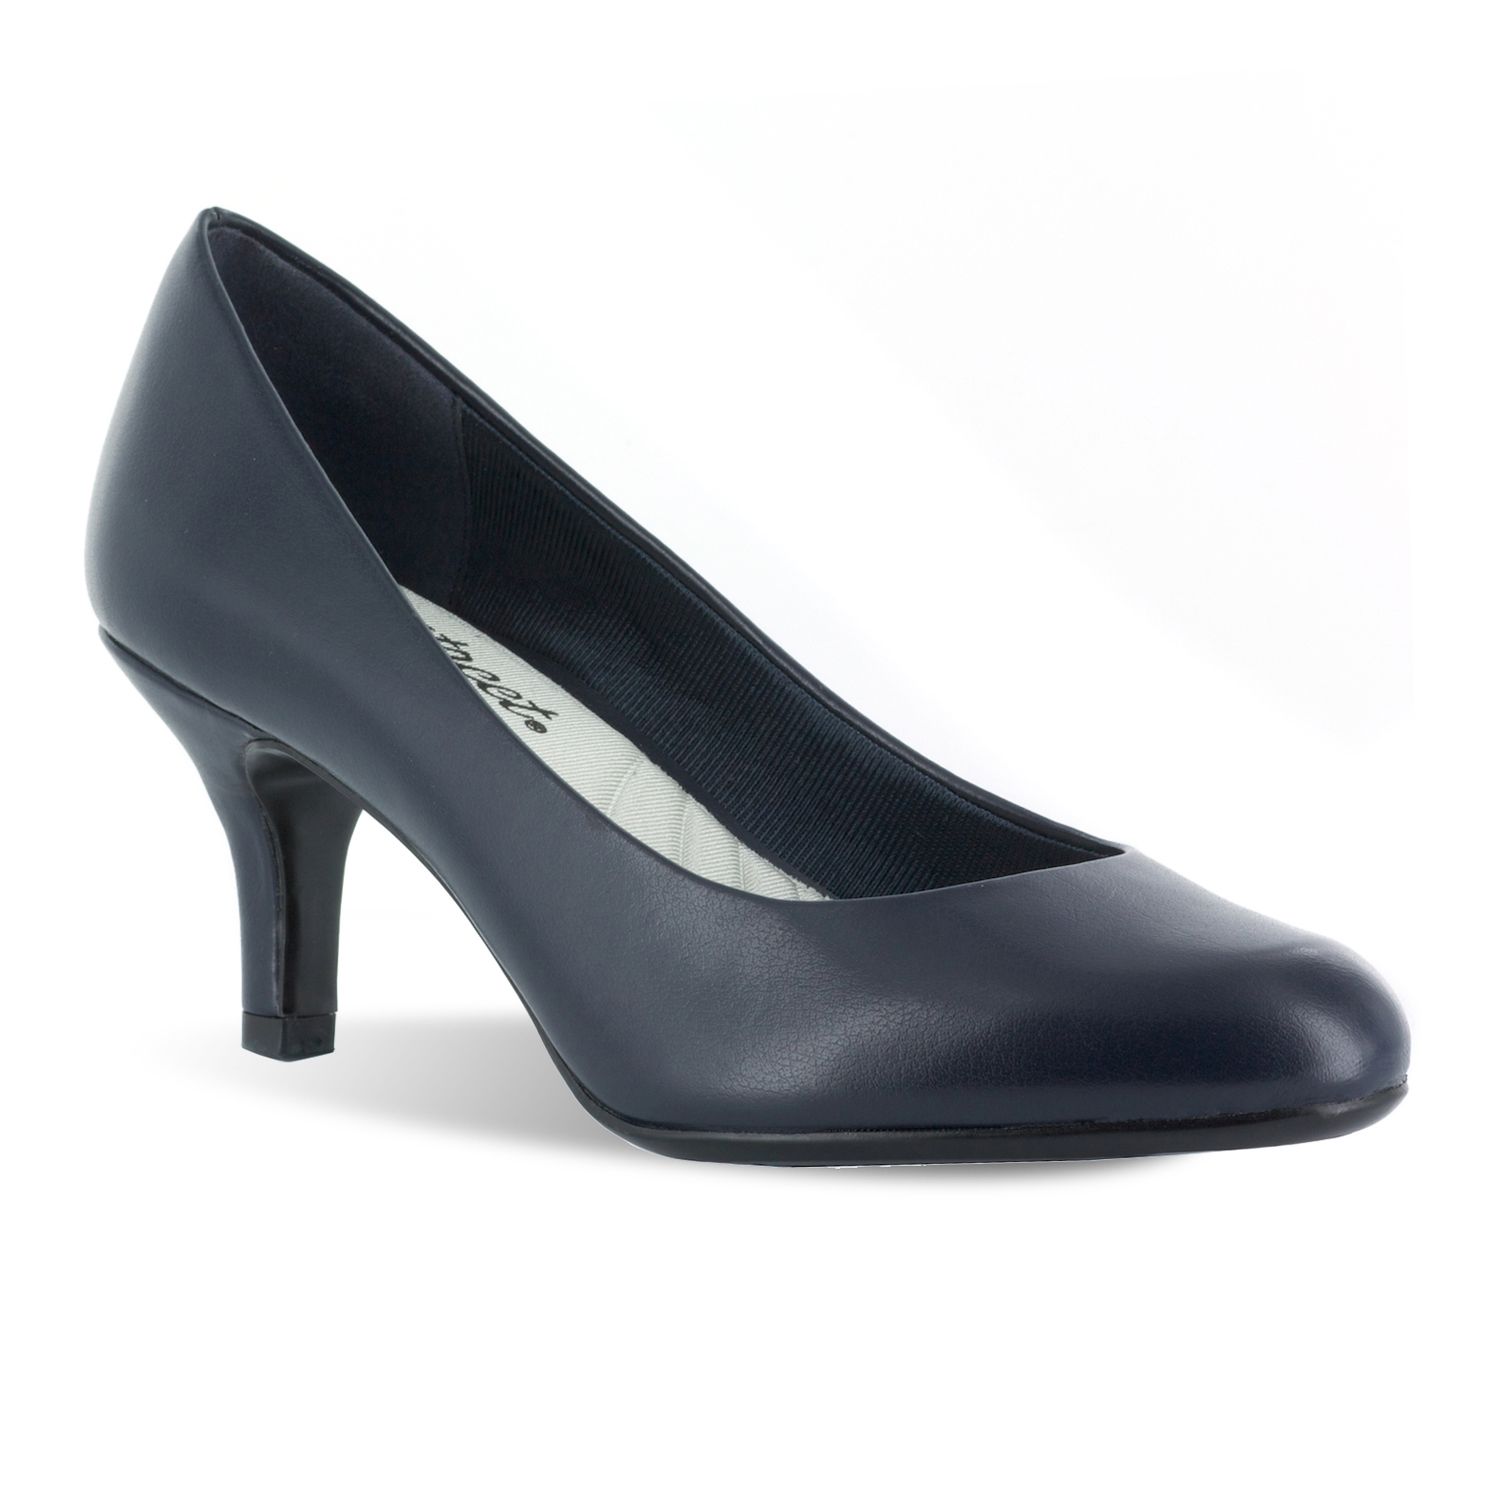 Image for Easy Street Passion Women's Dress Heels at Kohl's.